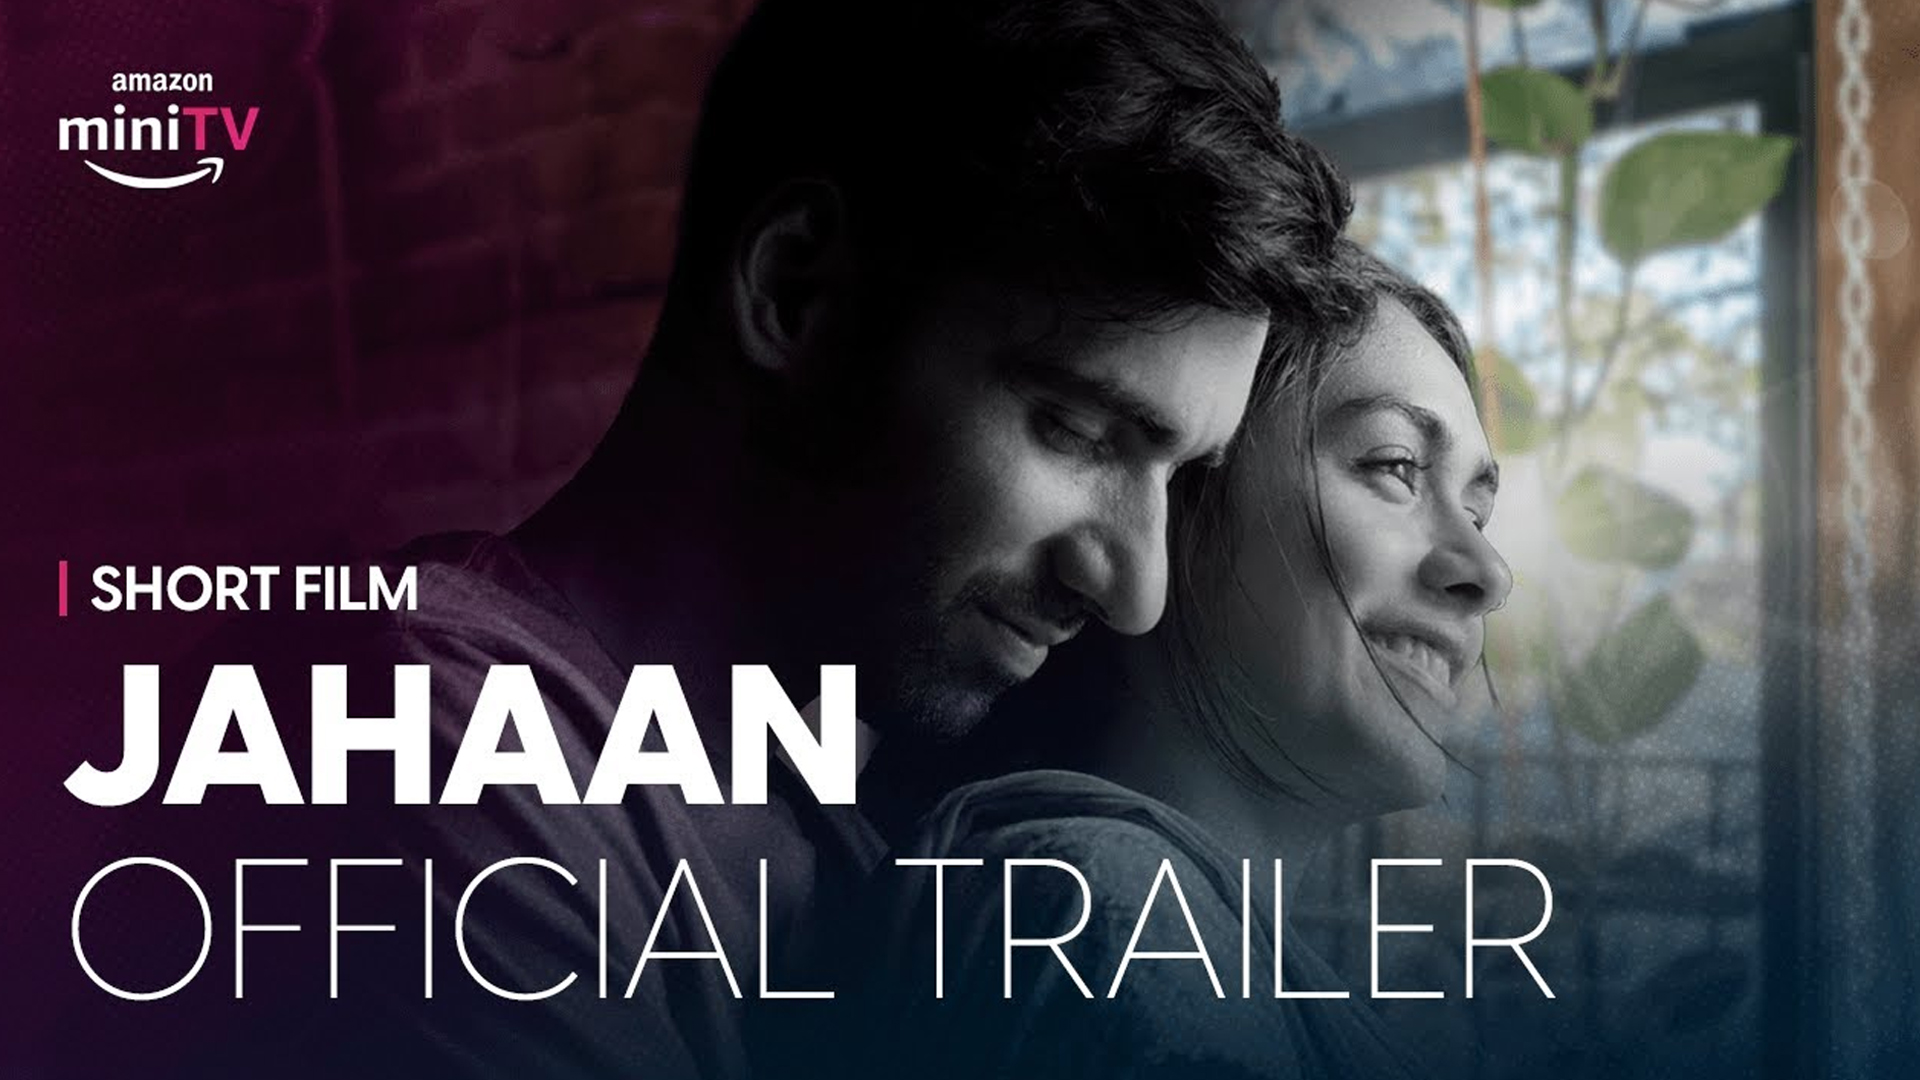 Mrunal Thakur is surely going to surprise you on Amazon miniTV’s upcoming romantic drama Jahaan, which you can watch for free on Amazon’s shopping app